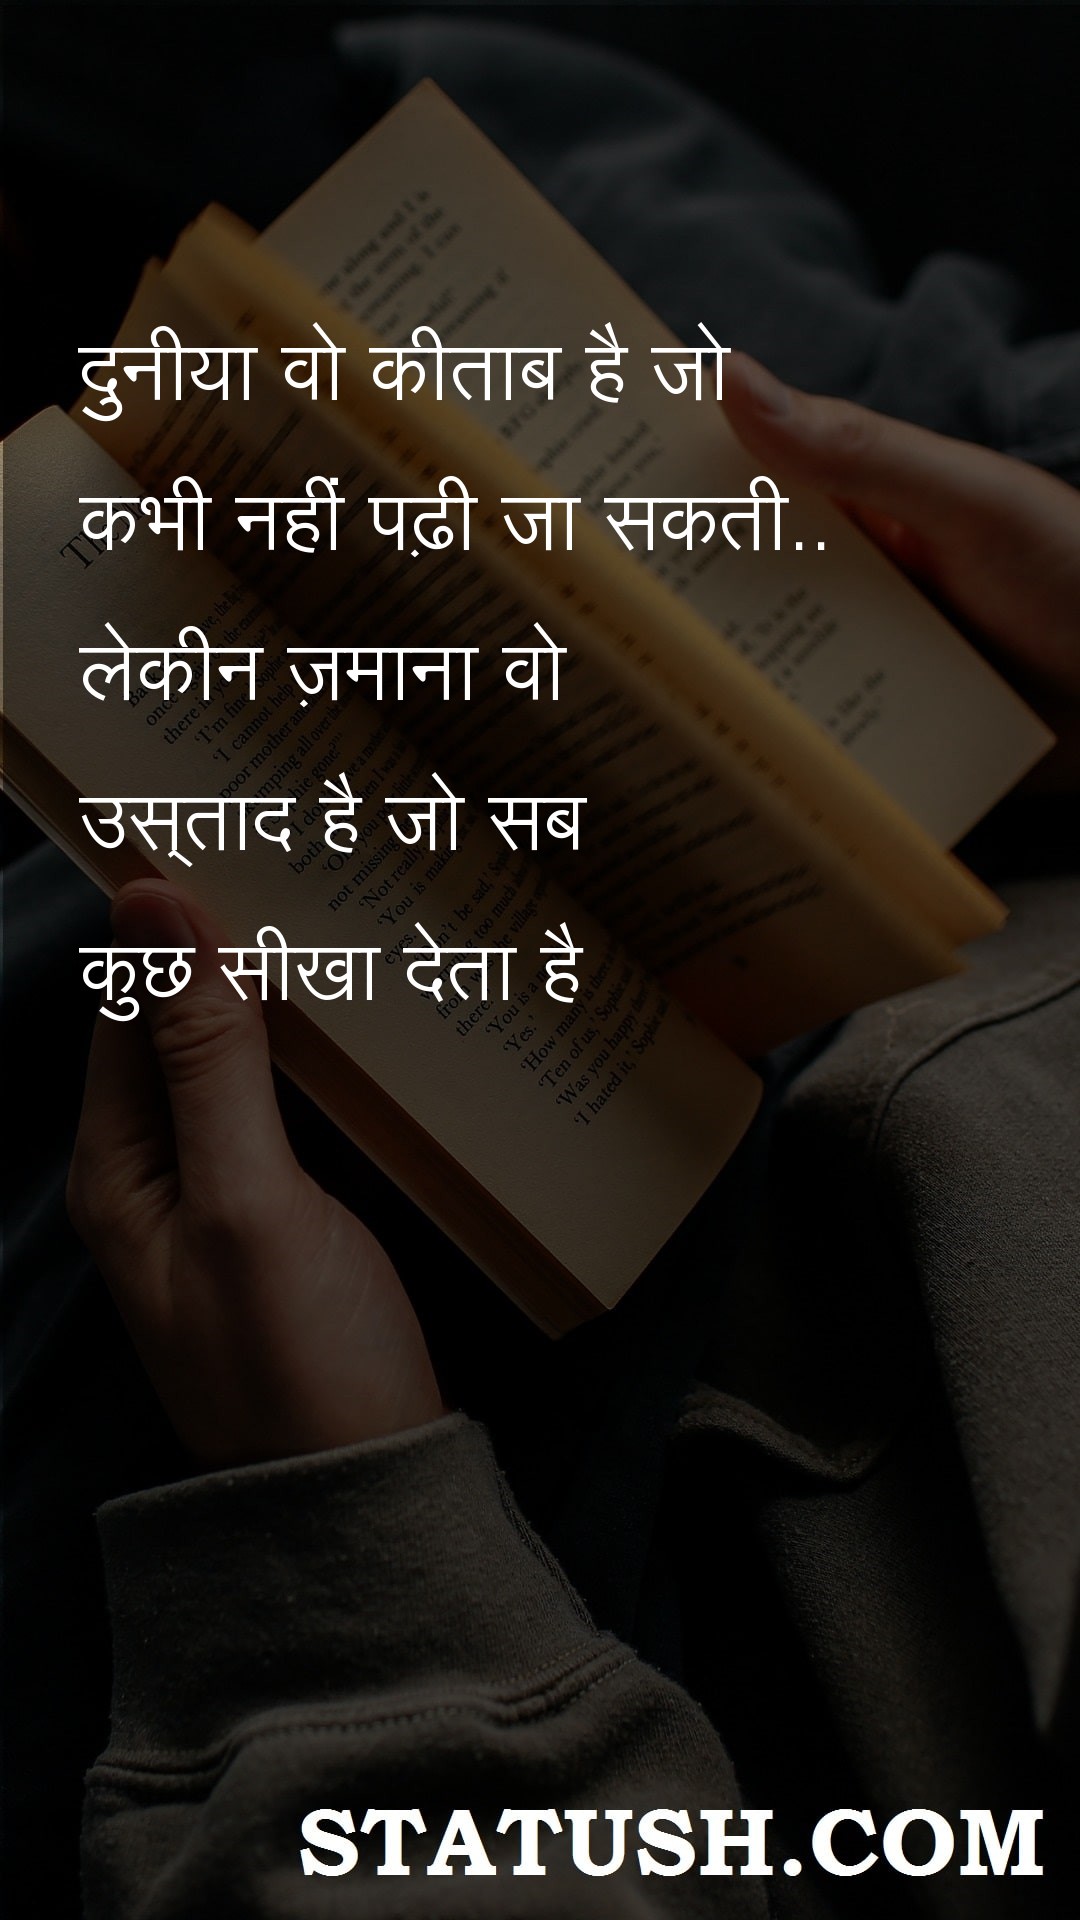 The world is a book that can never be read - Hindi Quotes at statush.com